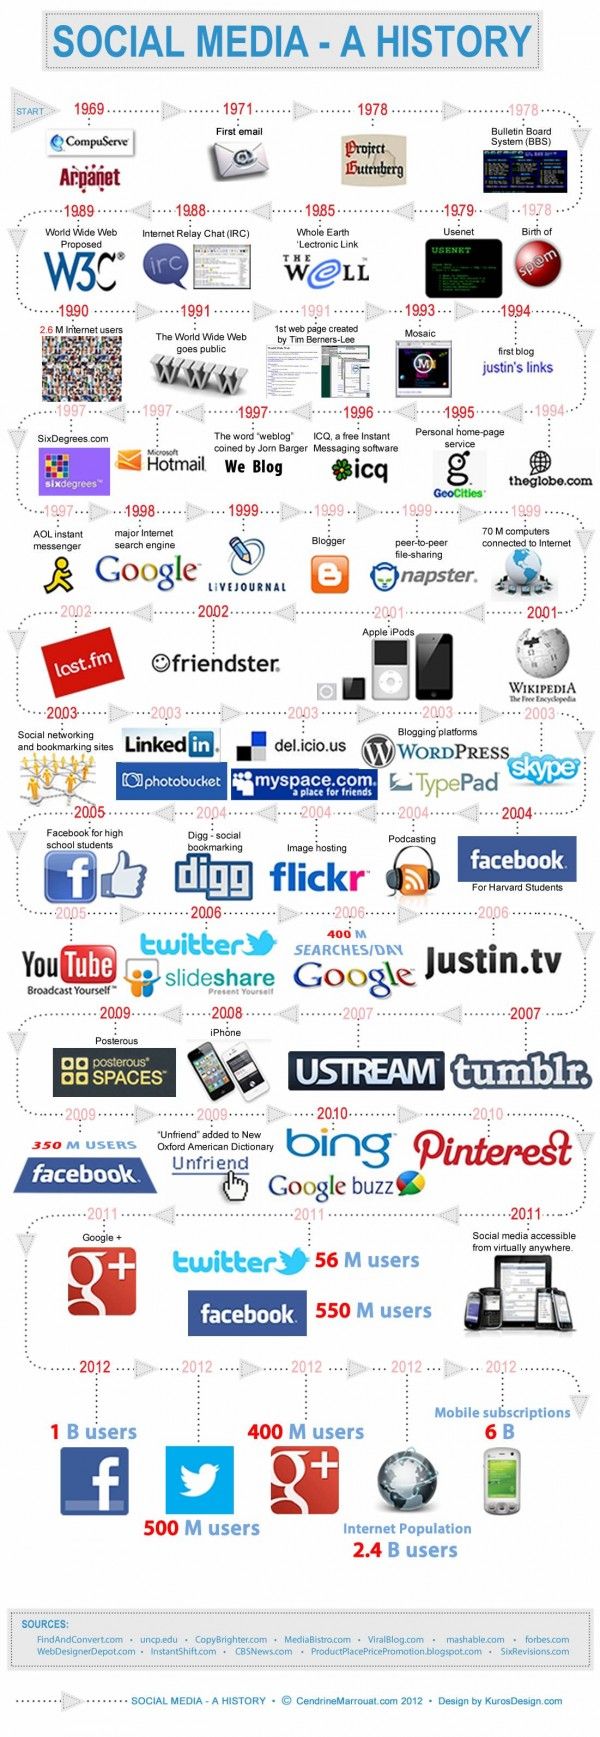 A Brief History Of Social Media (1969-2012) [INFOGRAPHIC]